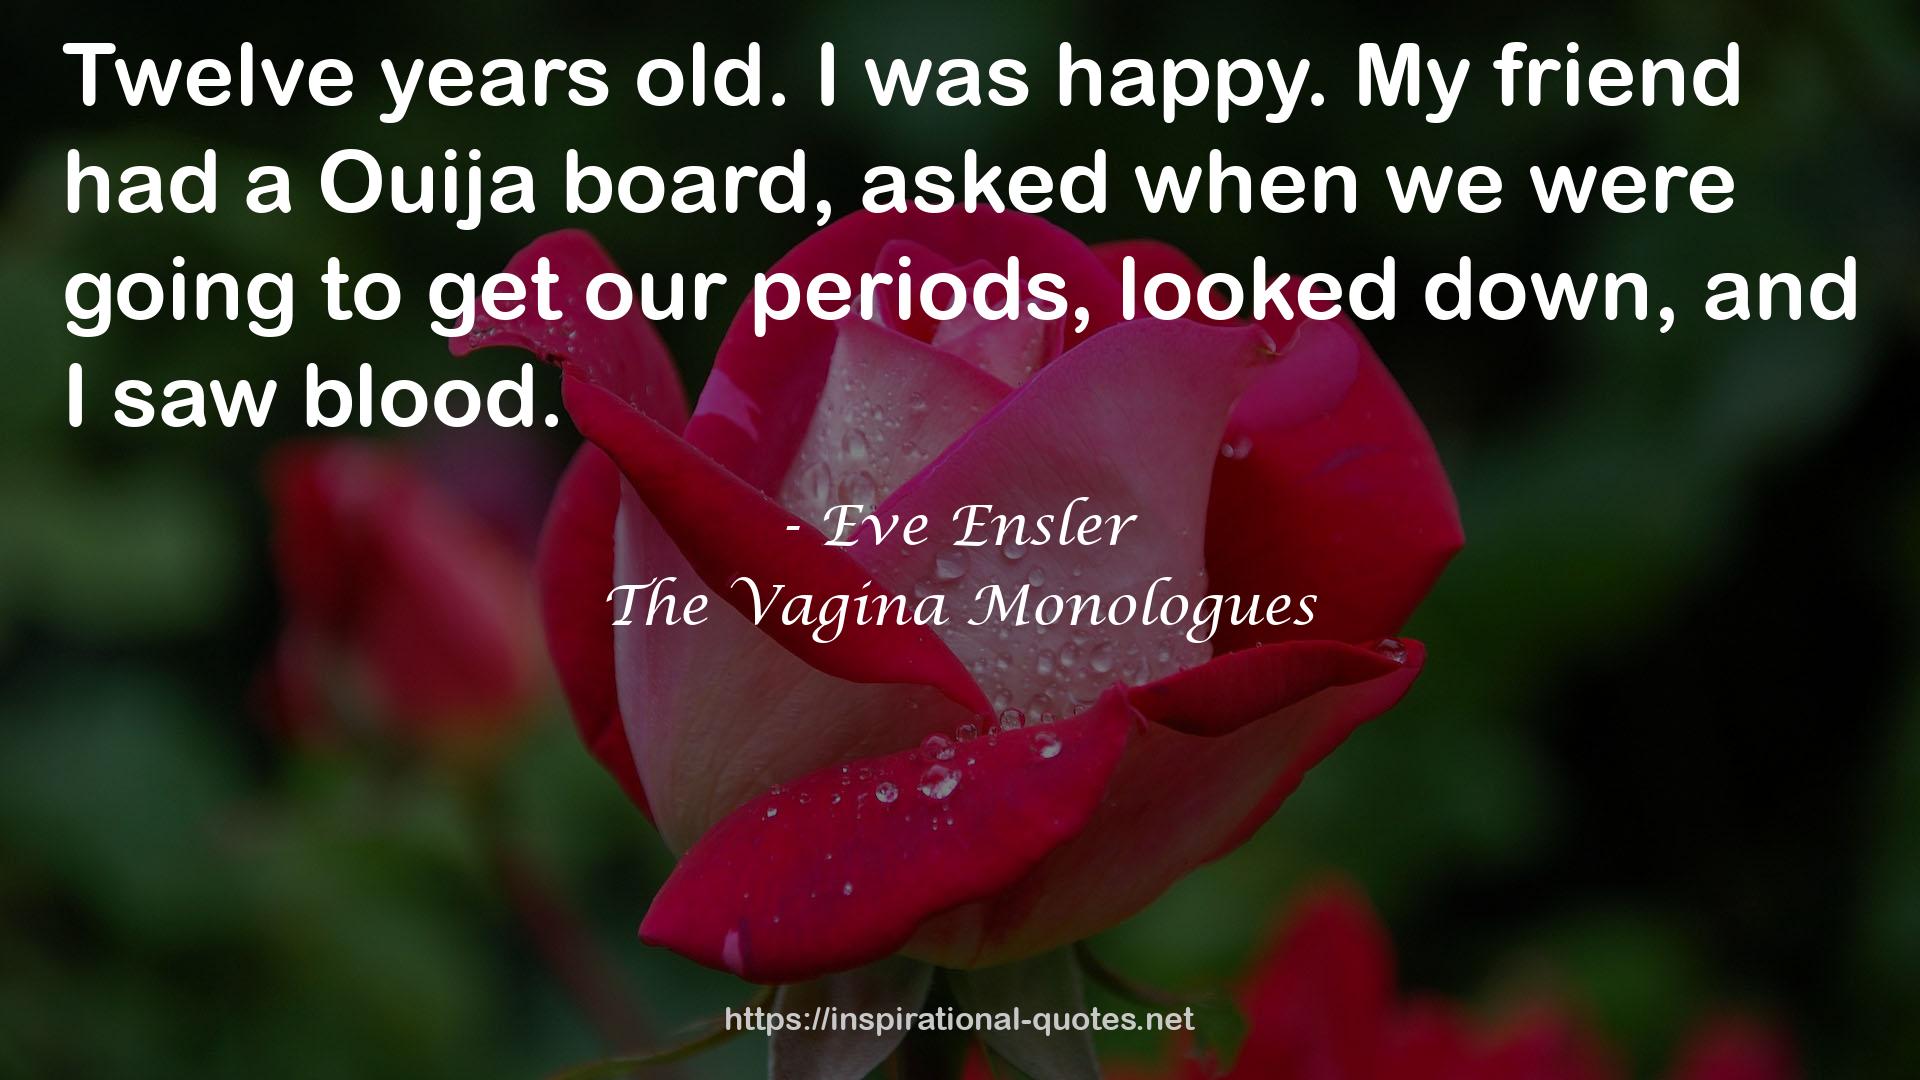 The Vagina Monologues QUOTES